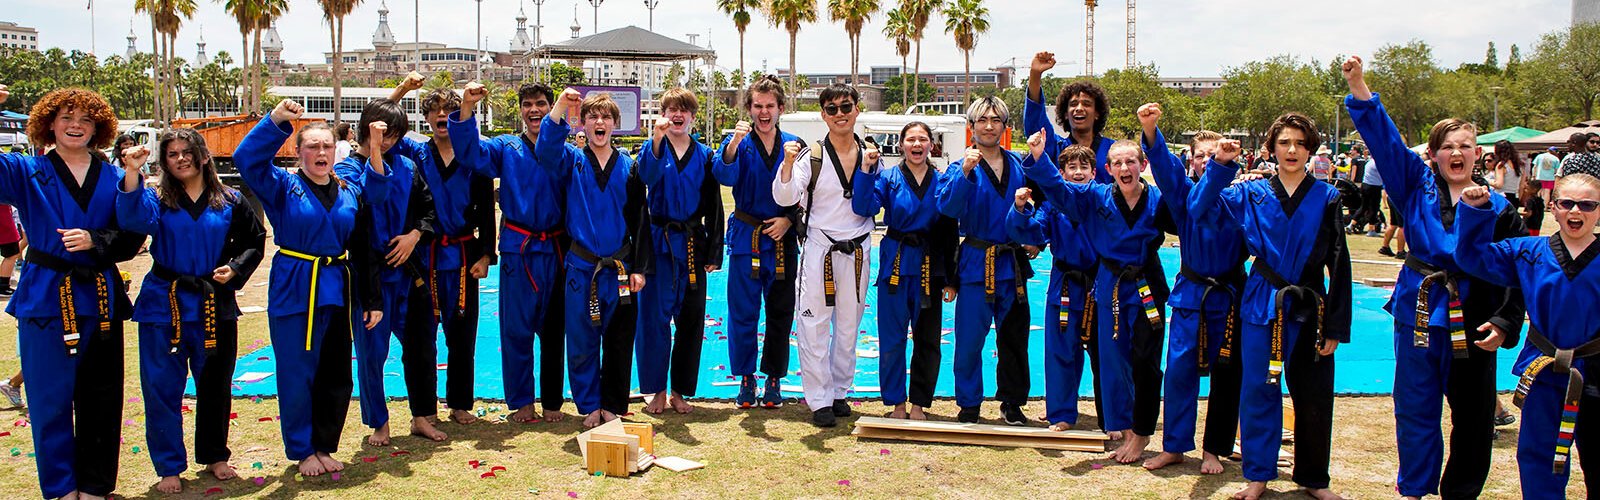 Members of the Florida Taekwondo State Demonstration Team at the City of Tampa Asian Pacific Islander Cultural Festival.